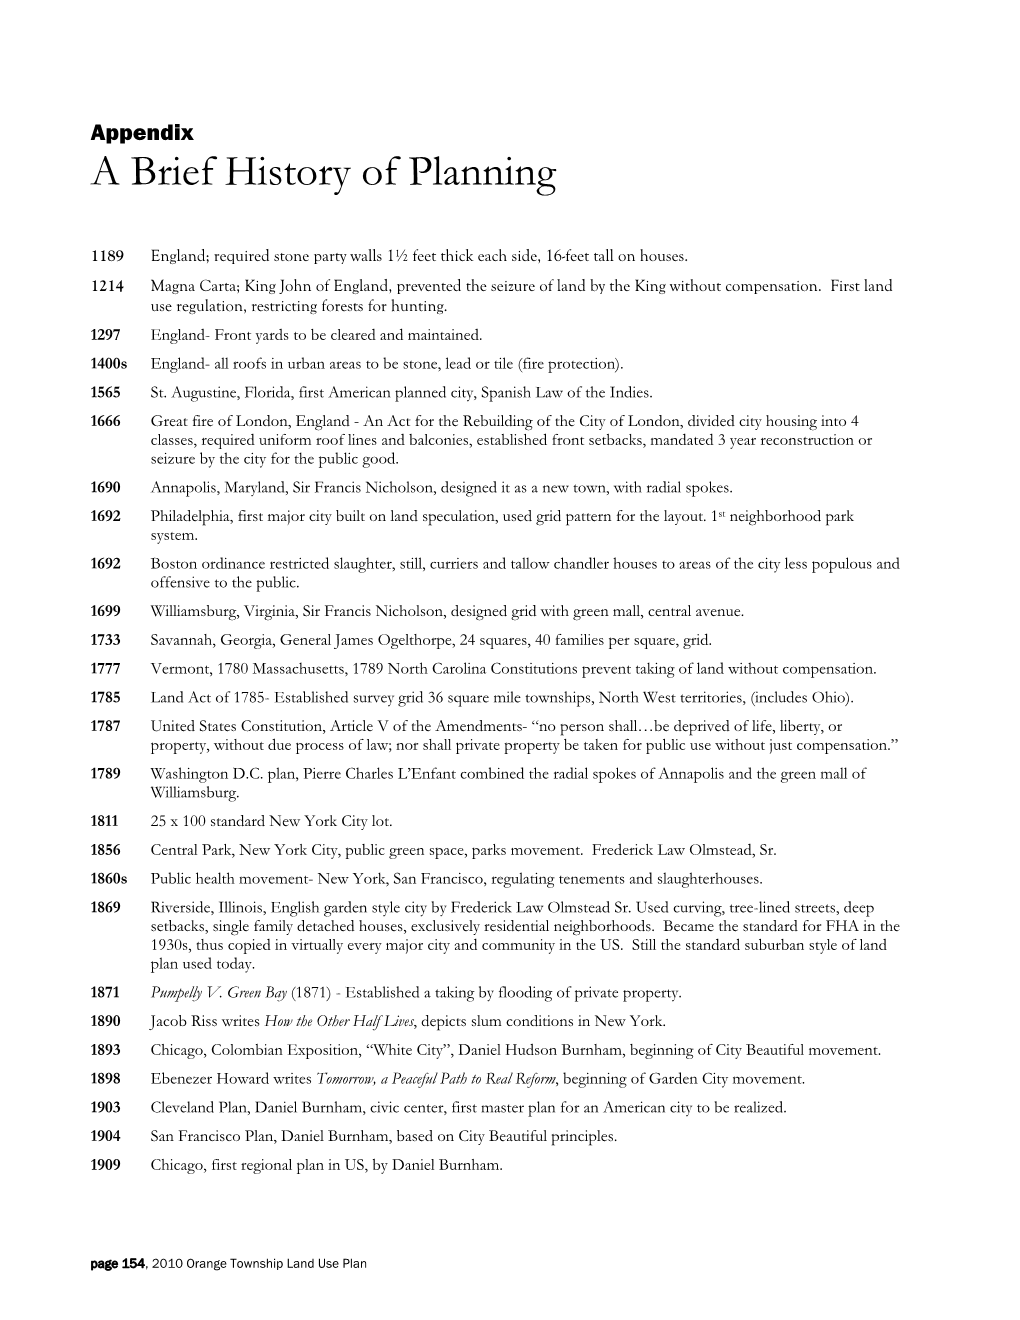 A Brief History of Planning